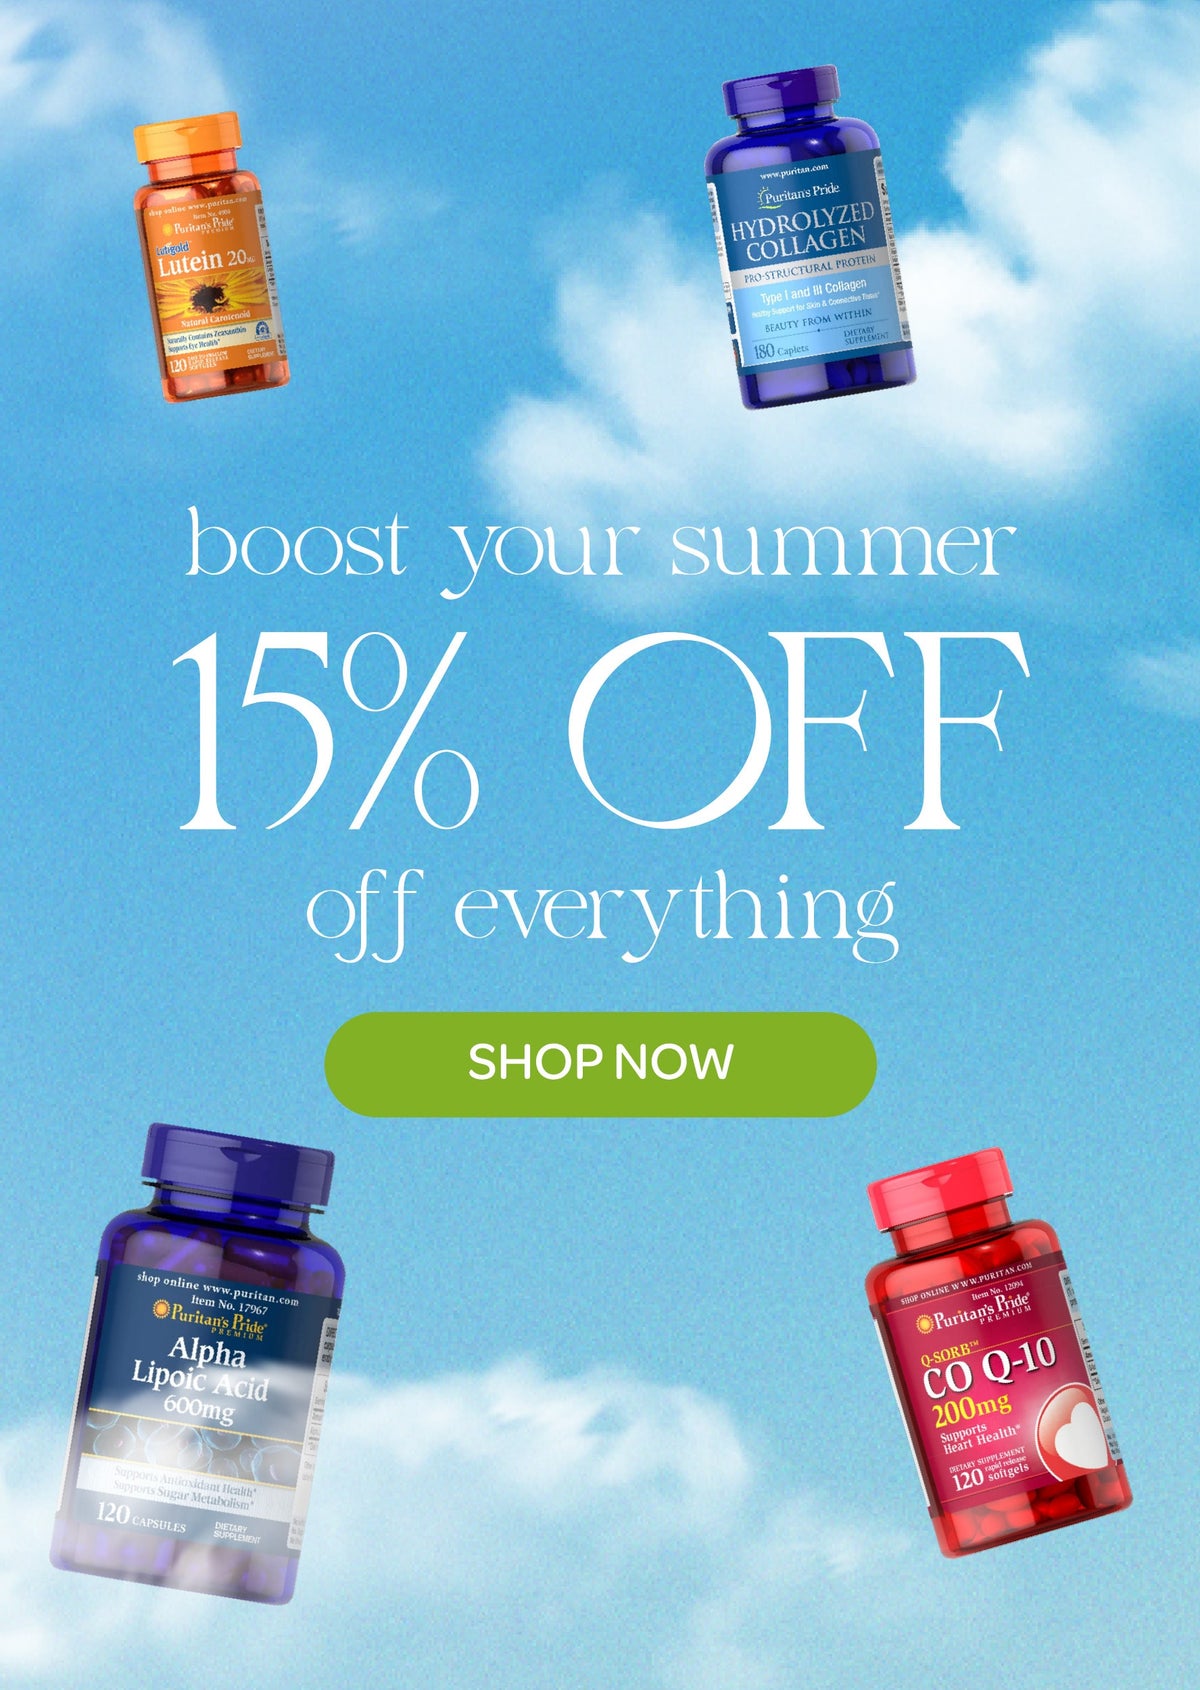 15% off everything